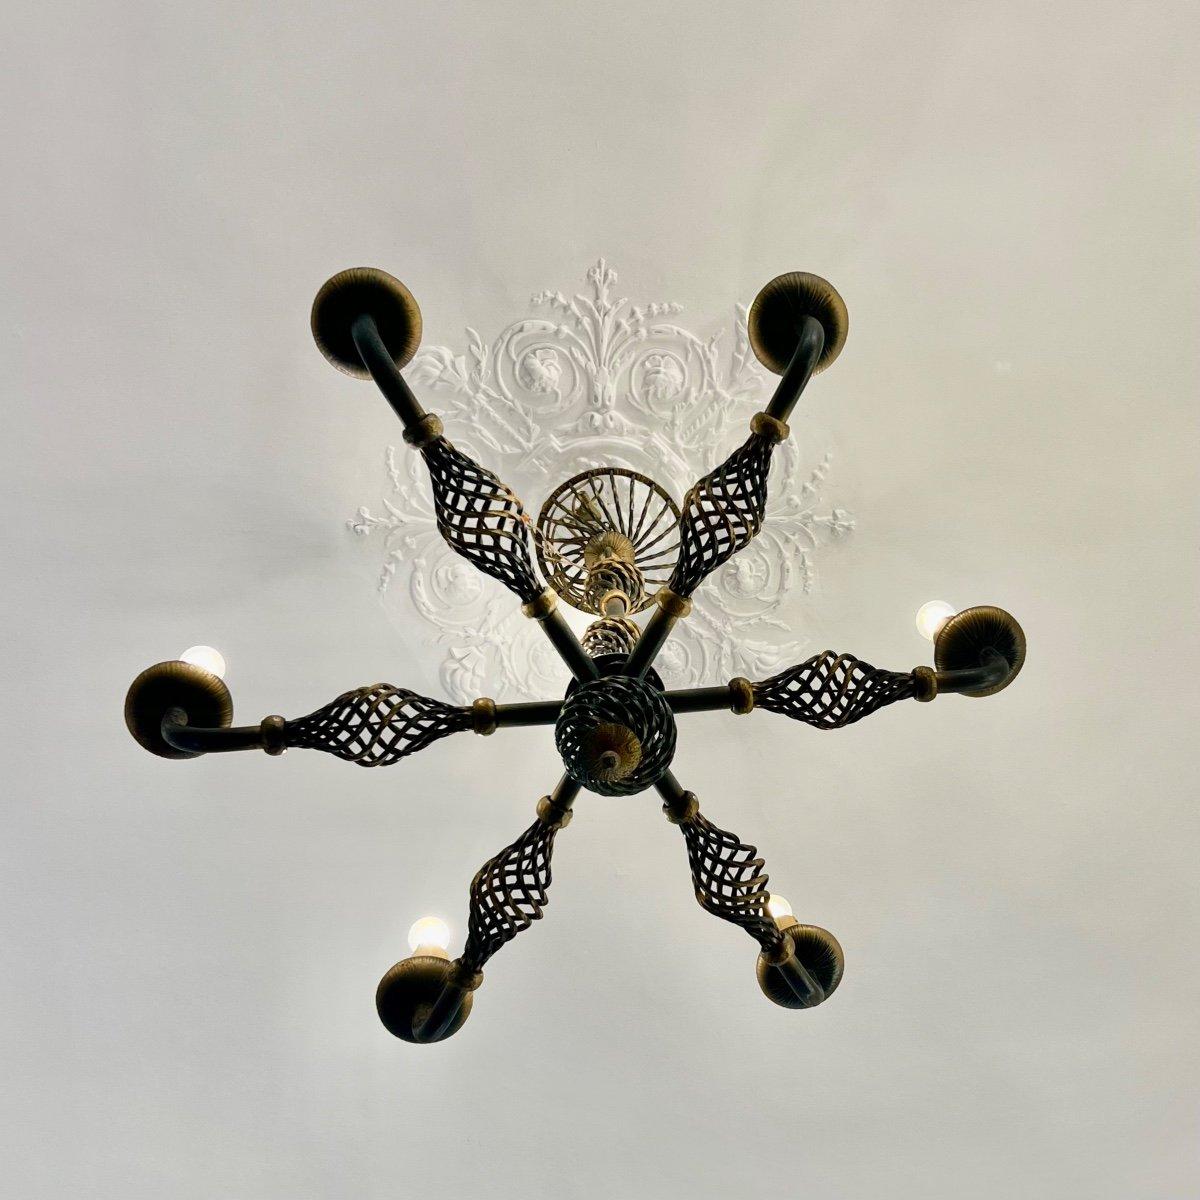 This stunning Art Deco chandelier made from wrought iron dates back to 1940. It is elegantly patinated and comes equipped with six 4w LED lamps, making it ready for installation. The dimensions are 90x90 cm.